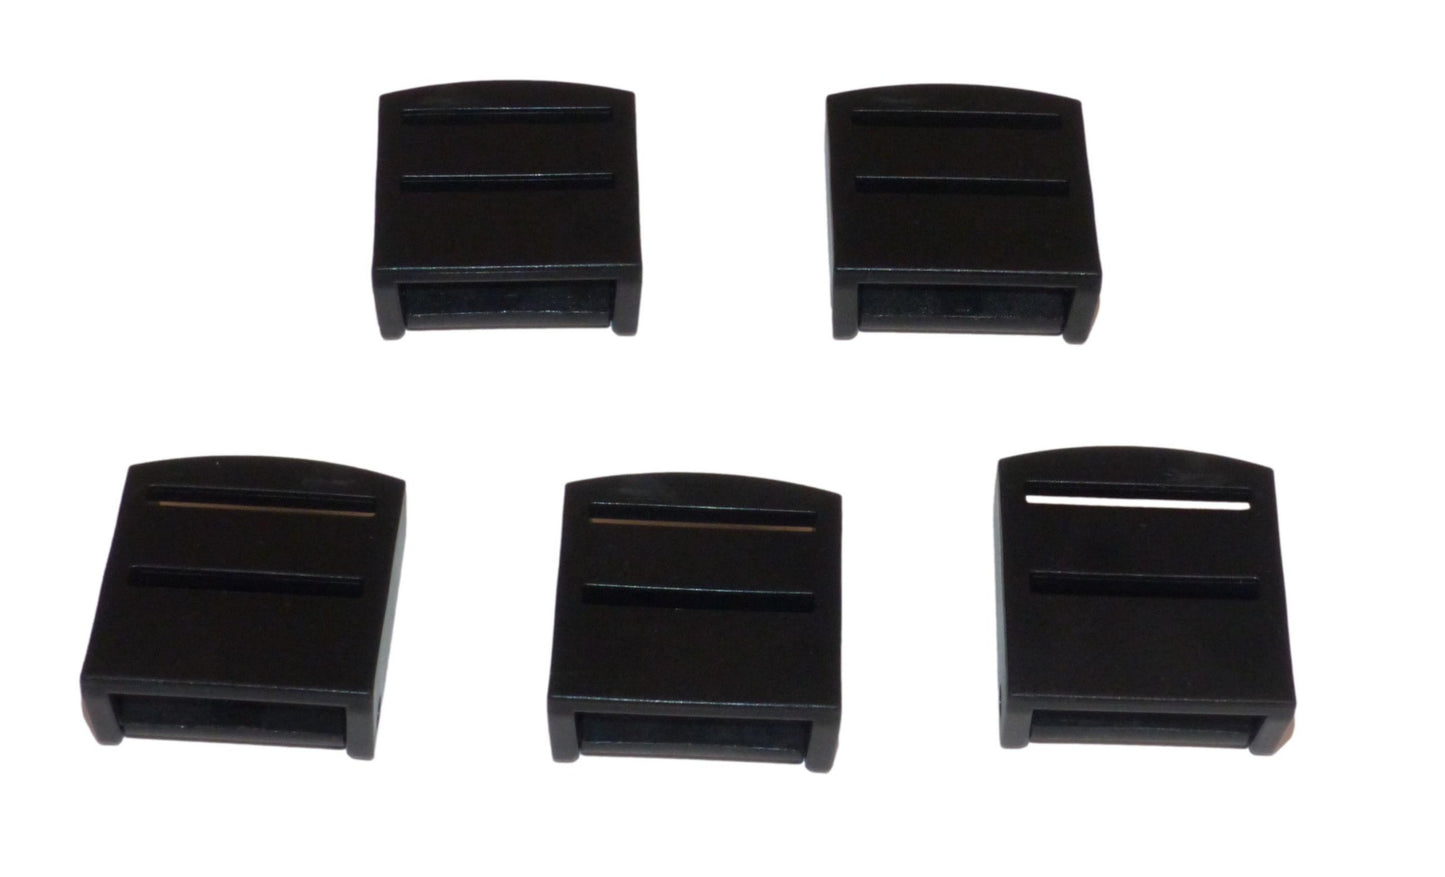 Benristraps 25mm plastic cam buckle (pack of 5)